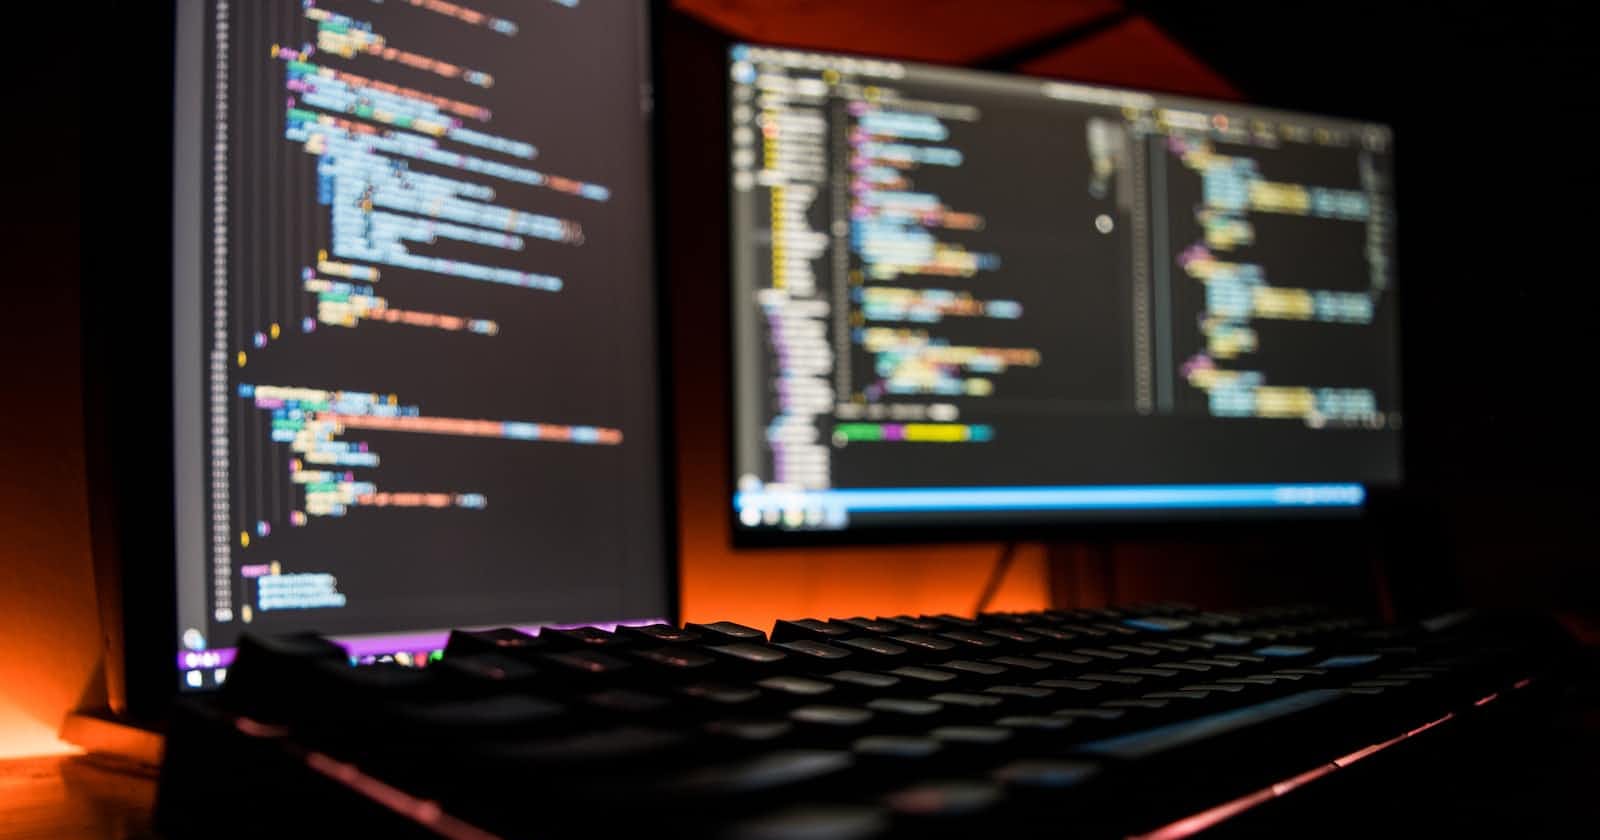 How to start with web development as a programmer in 2022